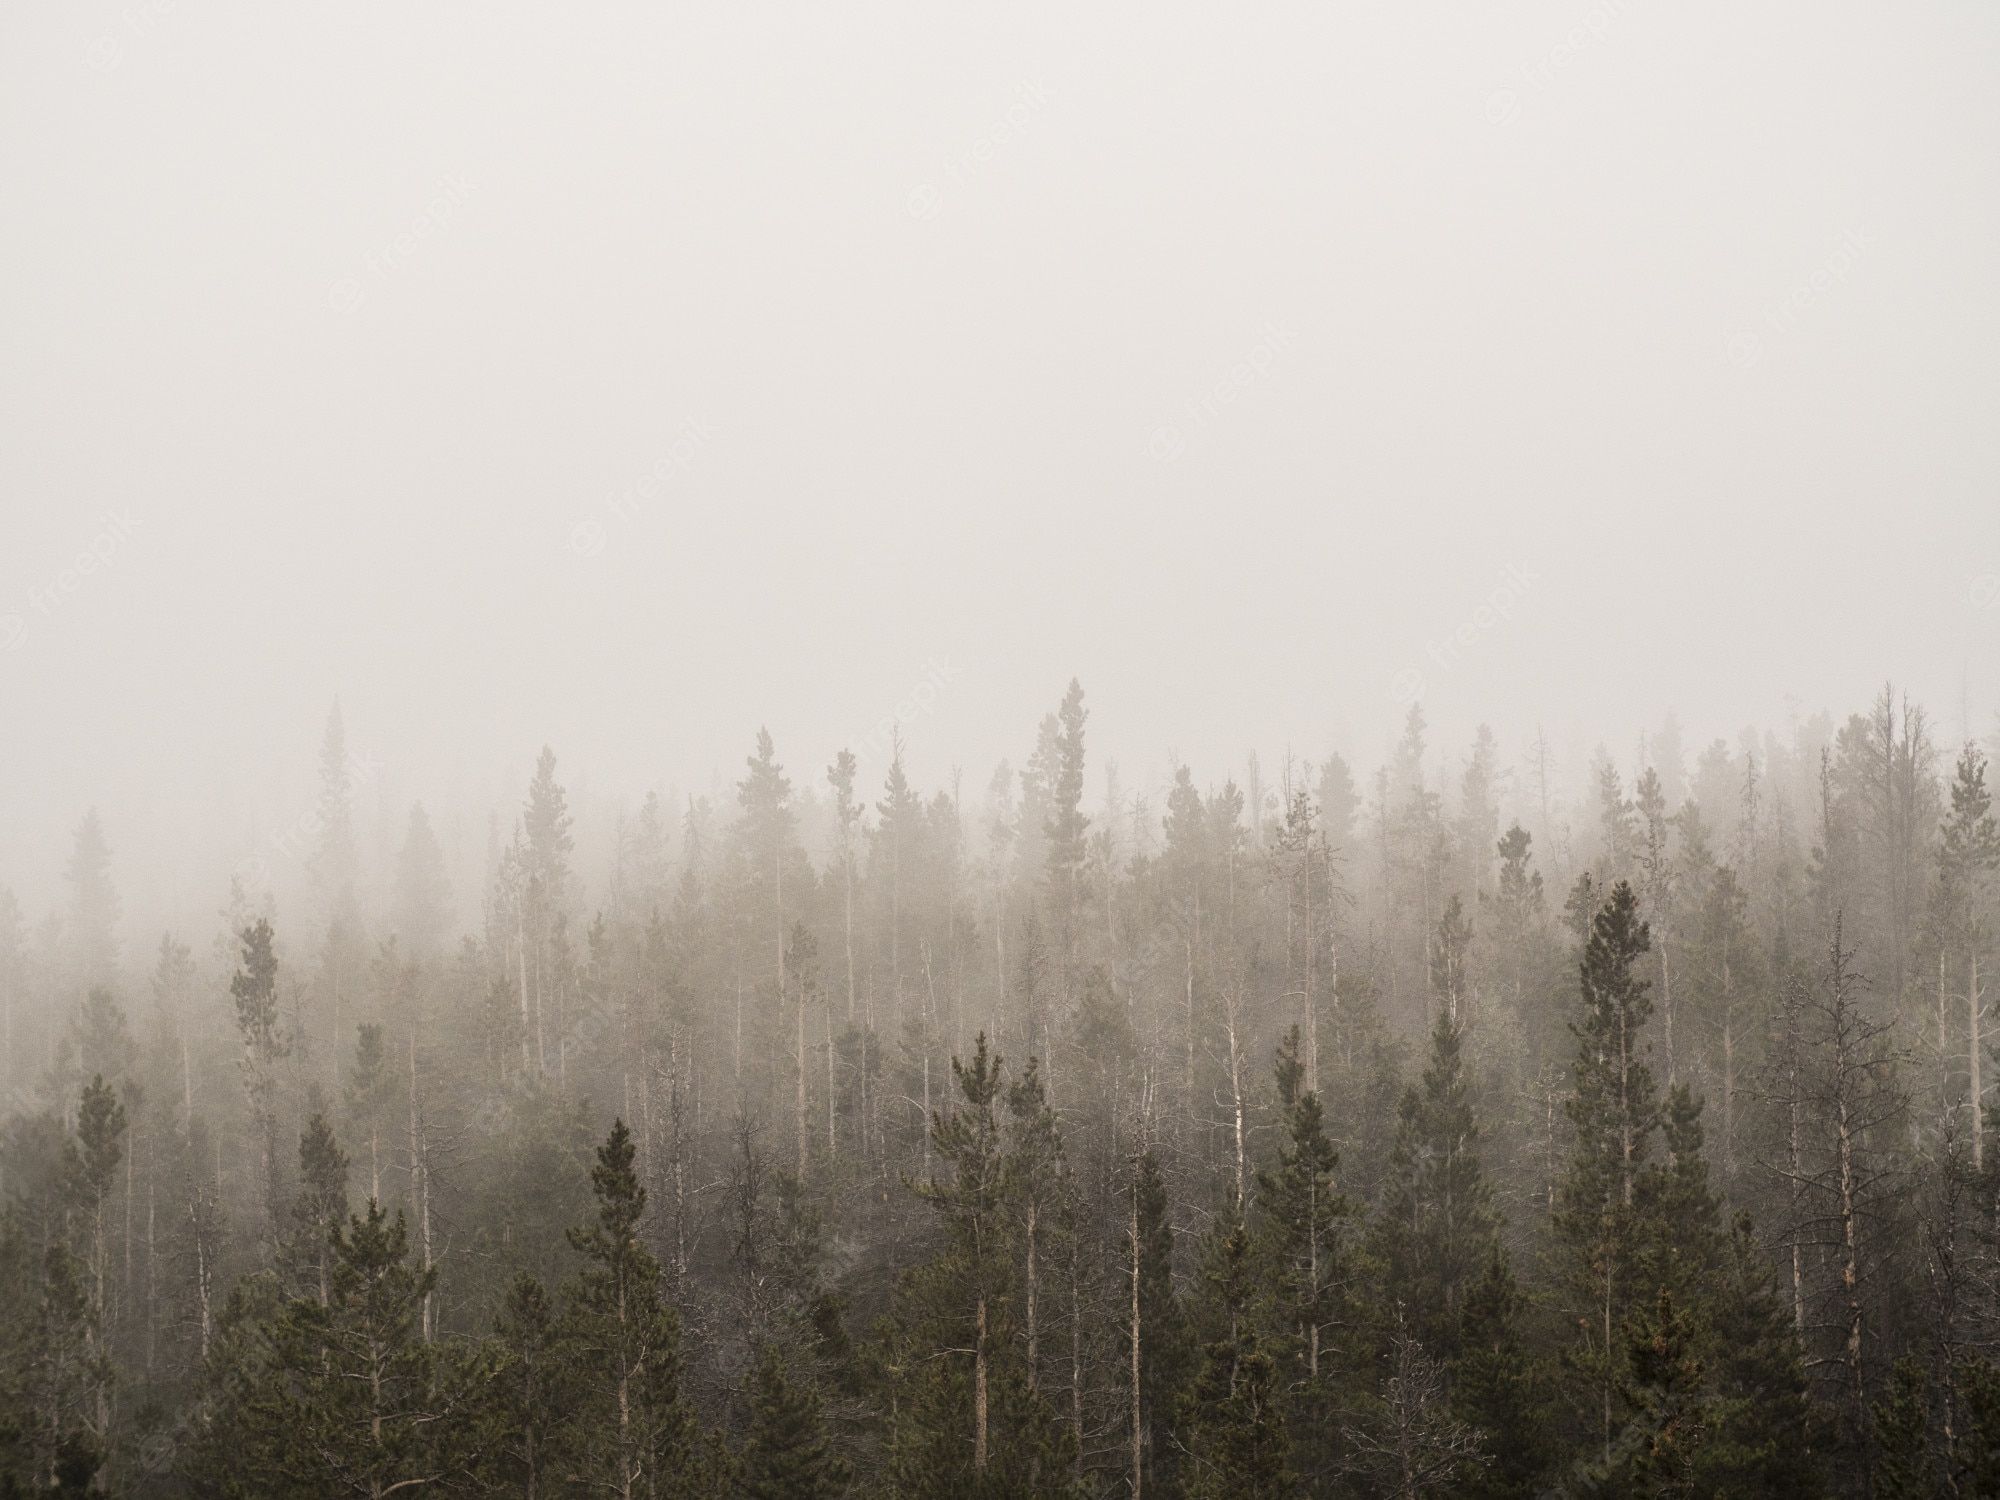 Foggy Pine Forest Image